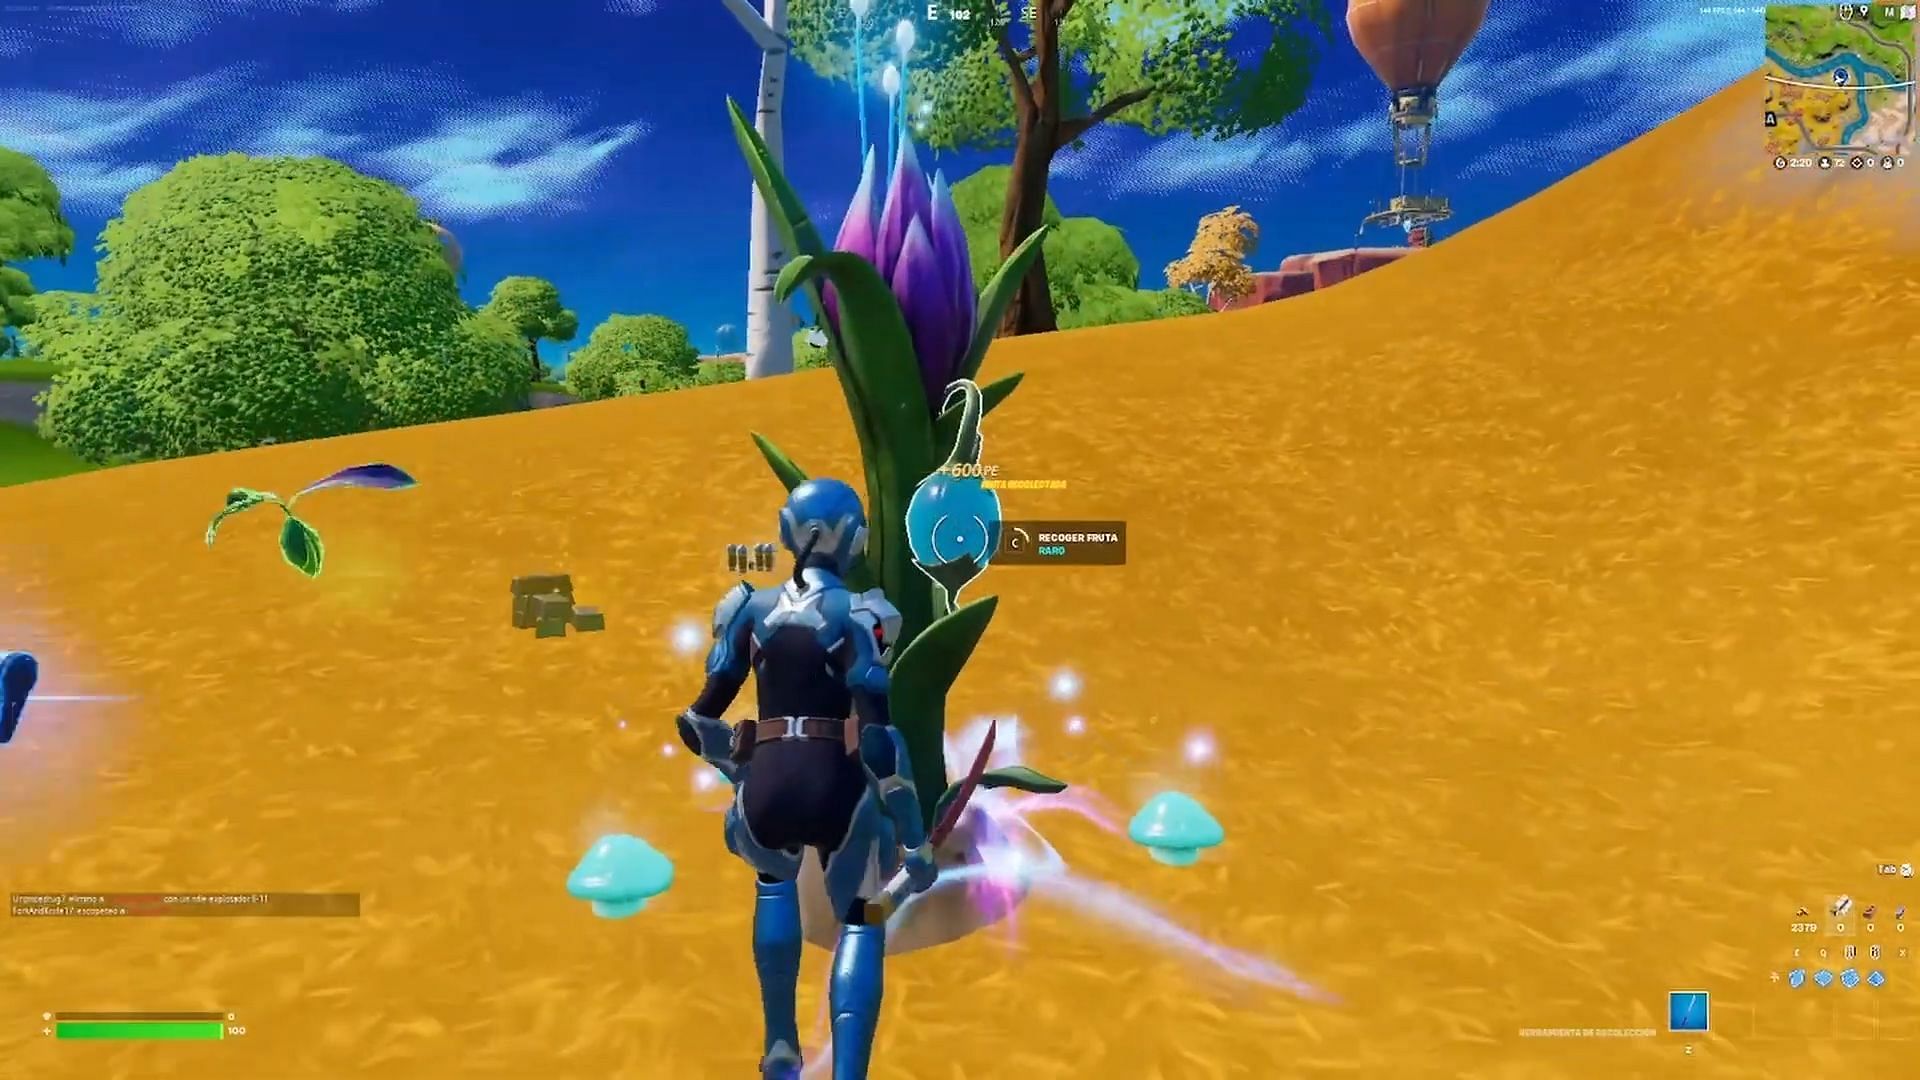 The Reality Tree in Fortnite is growing branches that are unbreakable